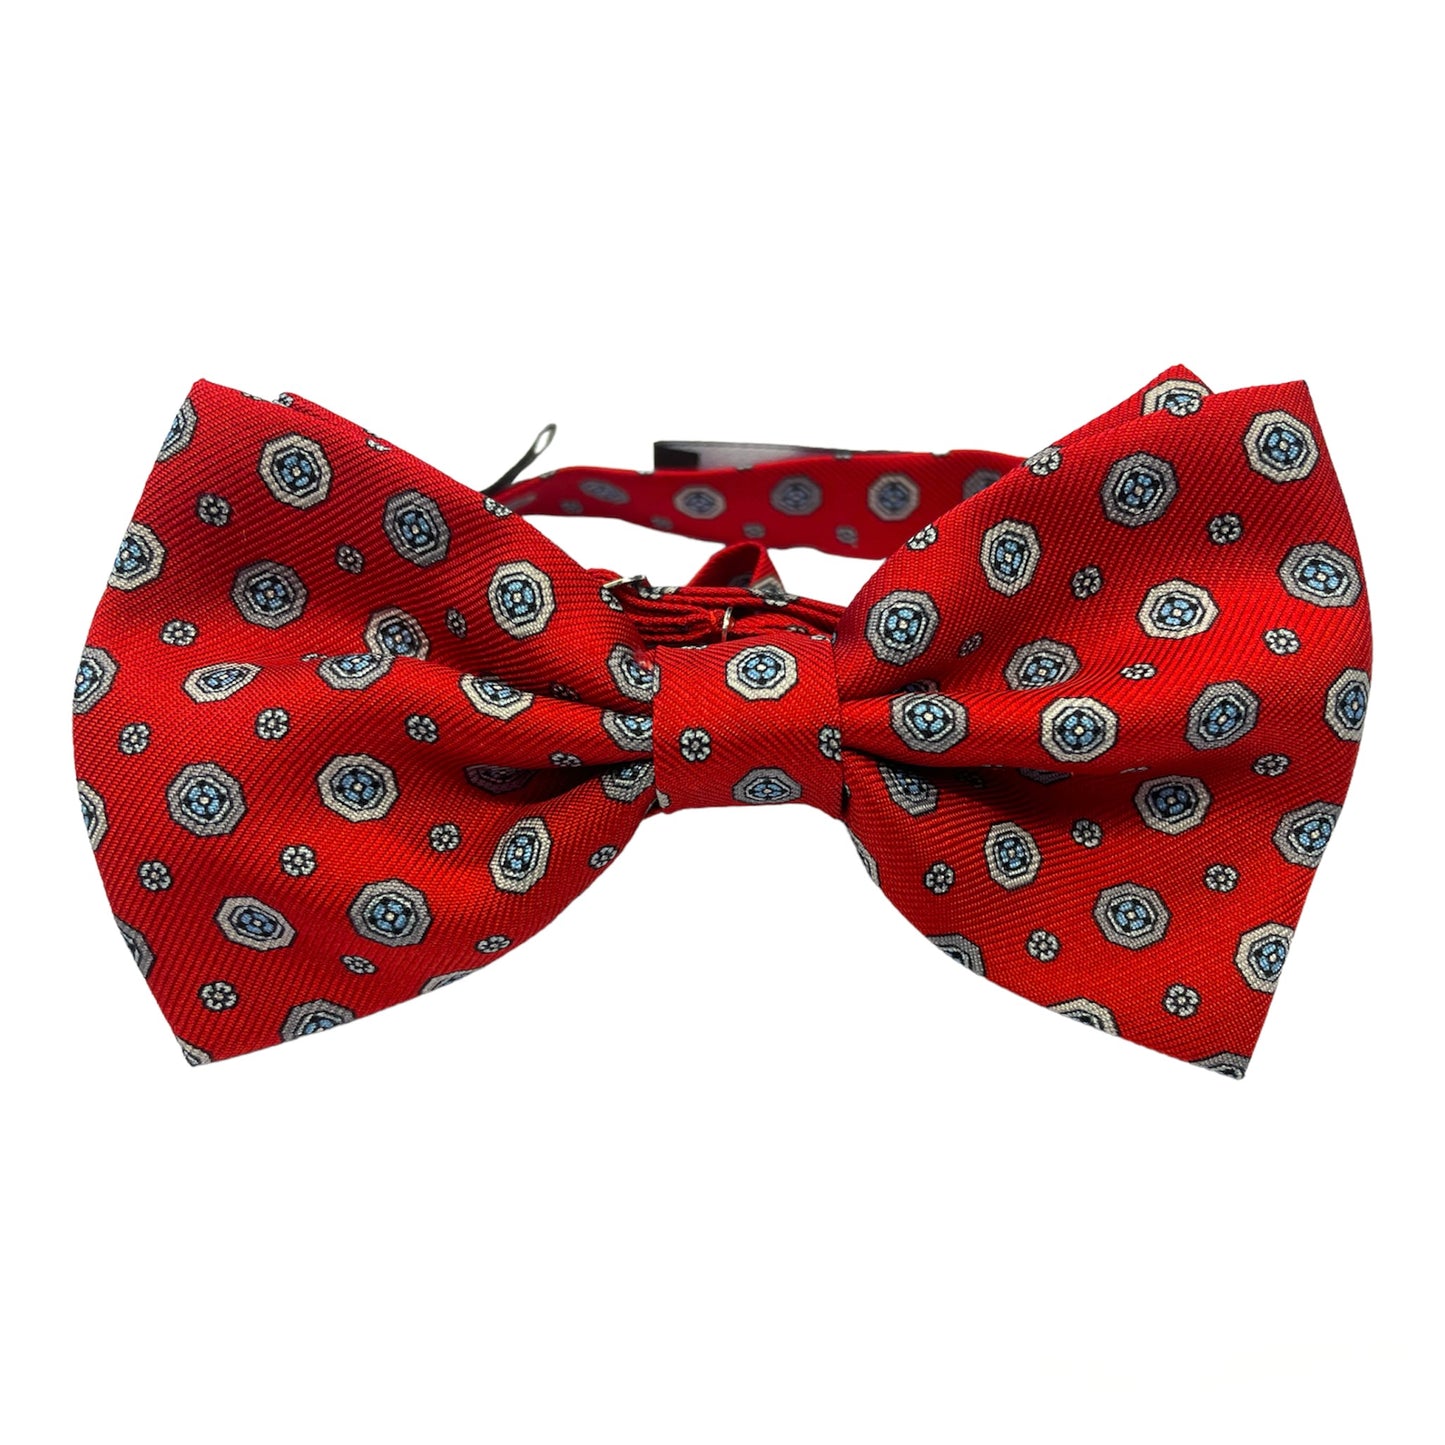 Tailored red silk bow tie with circles